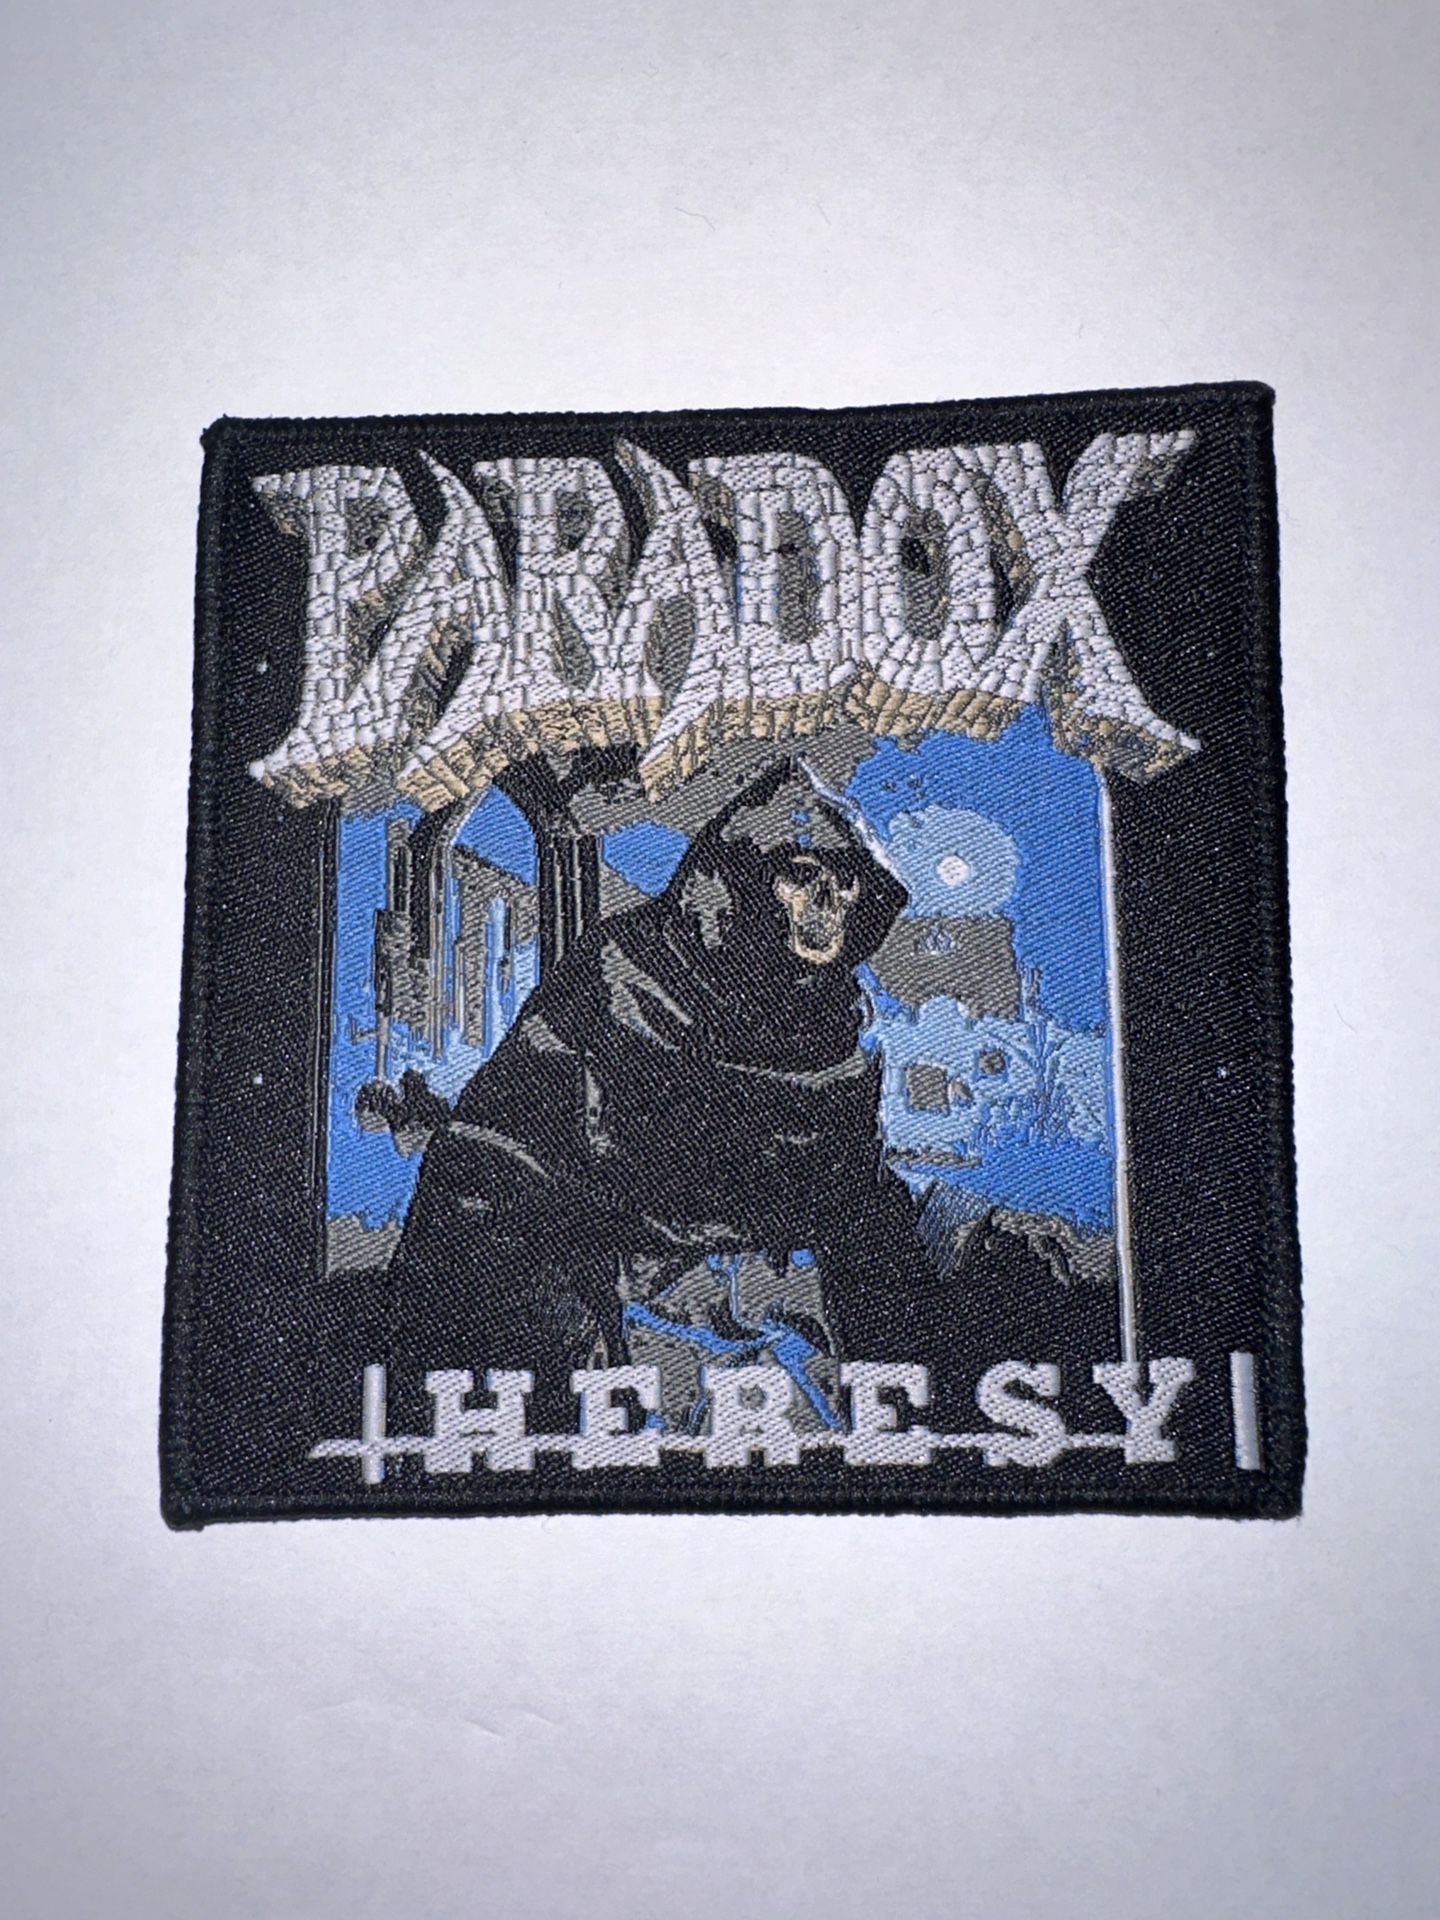 PARADOX, HERESY,SEW ON BLACK BORDER WOVEN PATCH